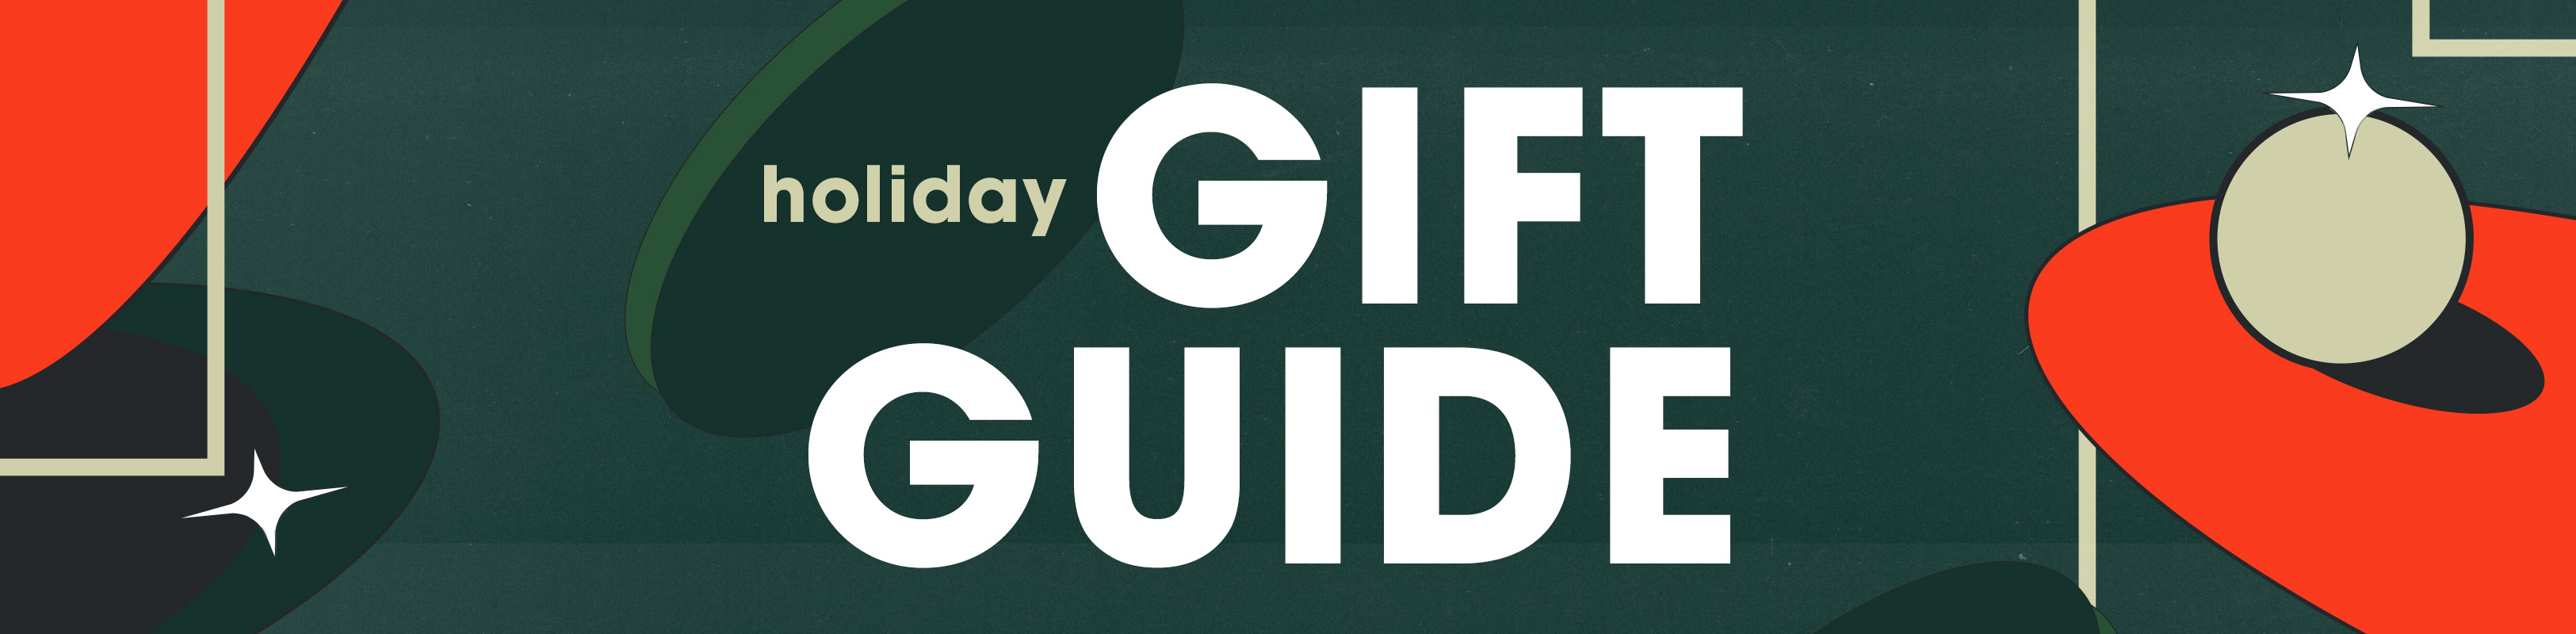 Shop the holiday Gift Guide